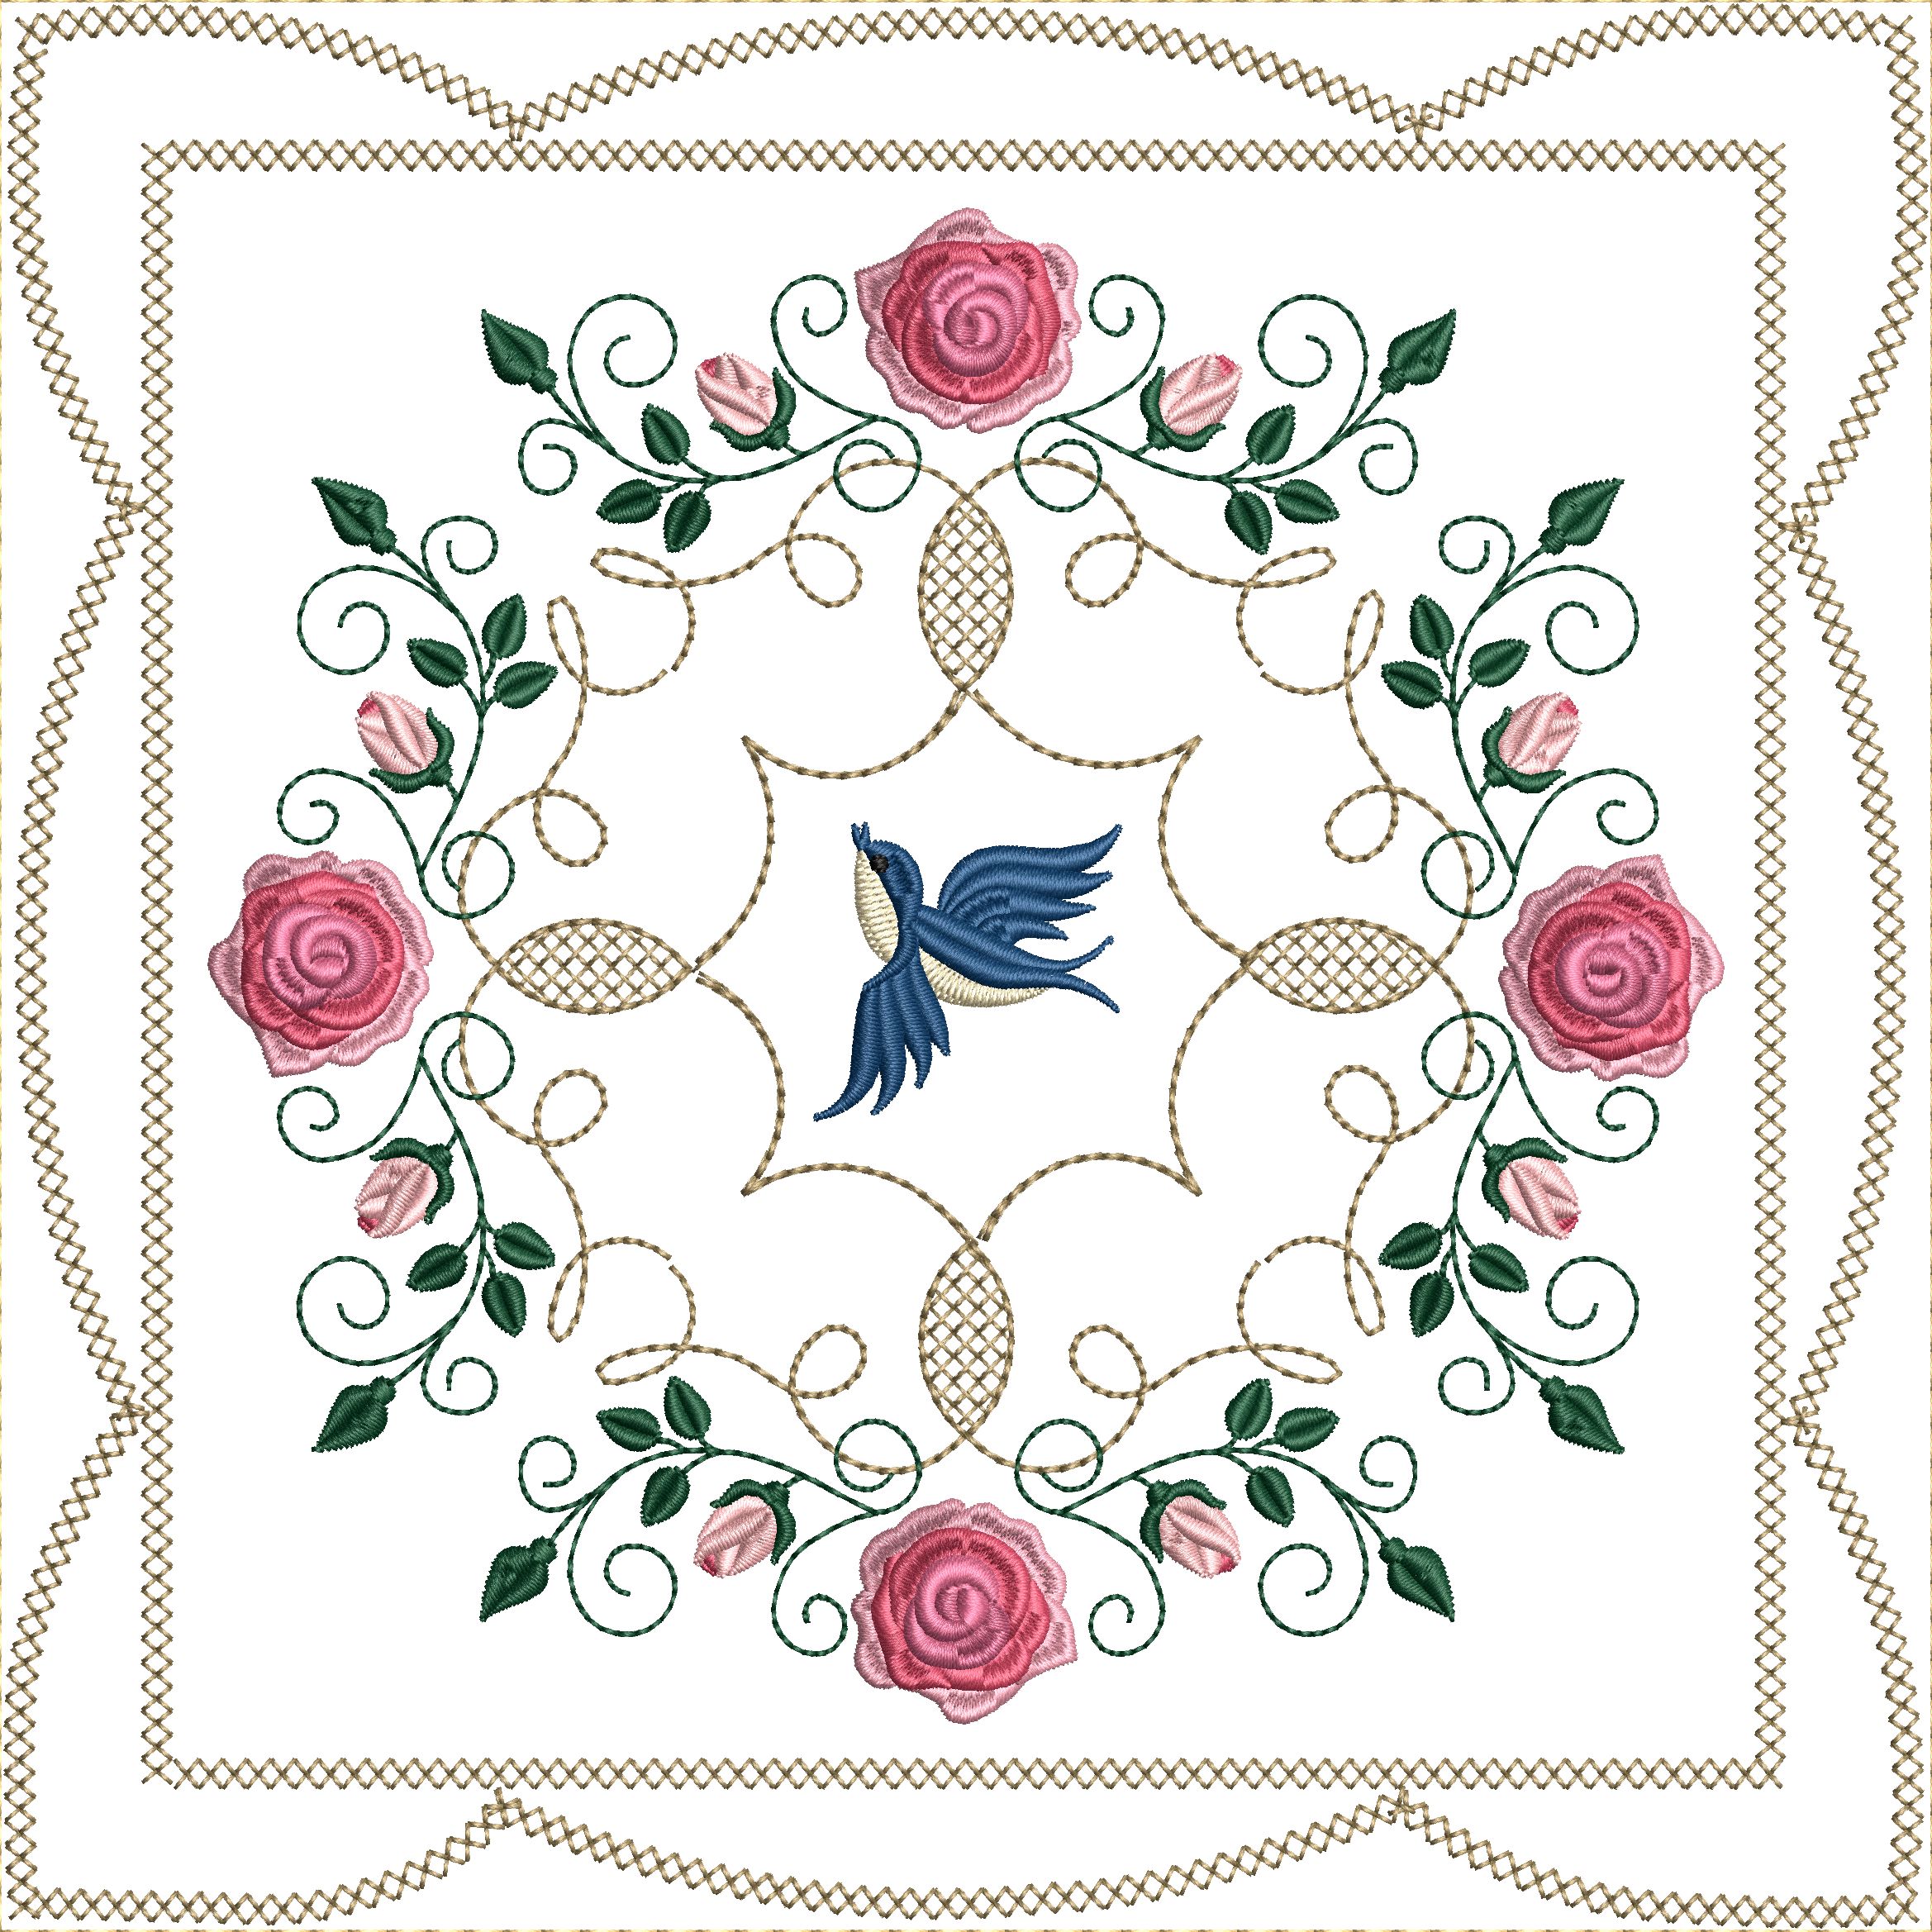 Bluebirds and Roses Quilt Blocks 8x8-6